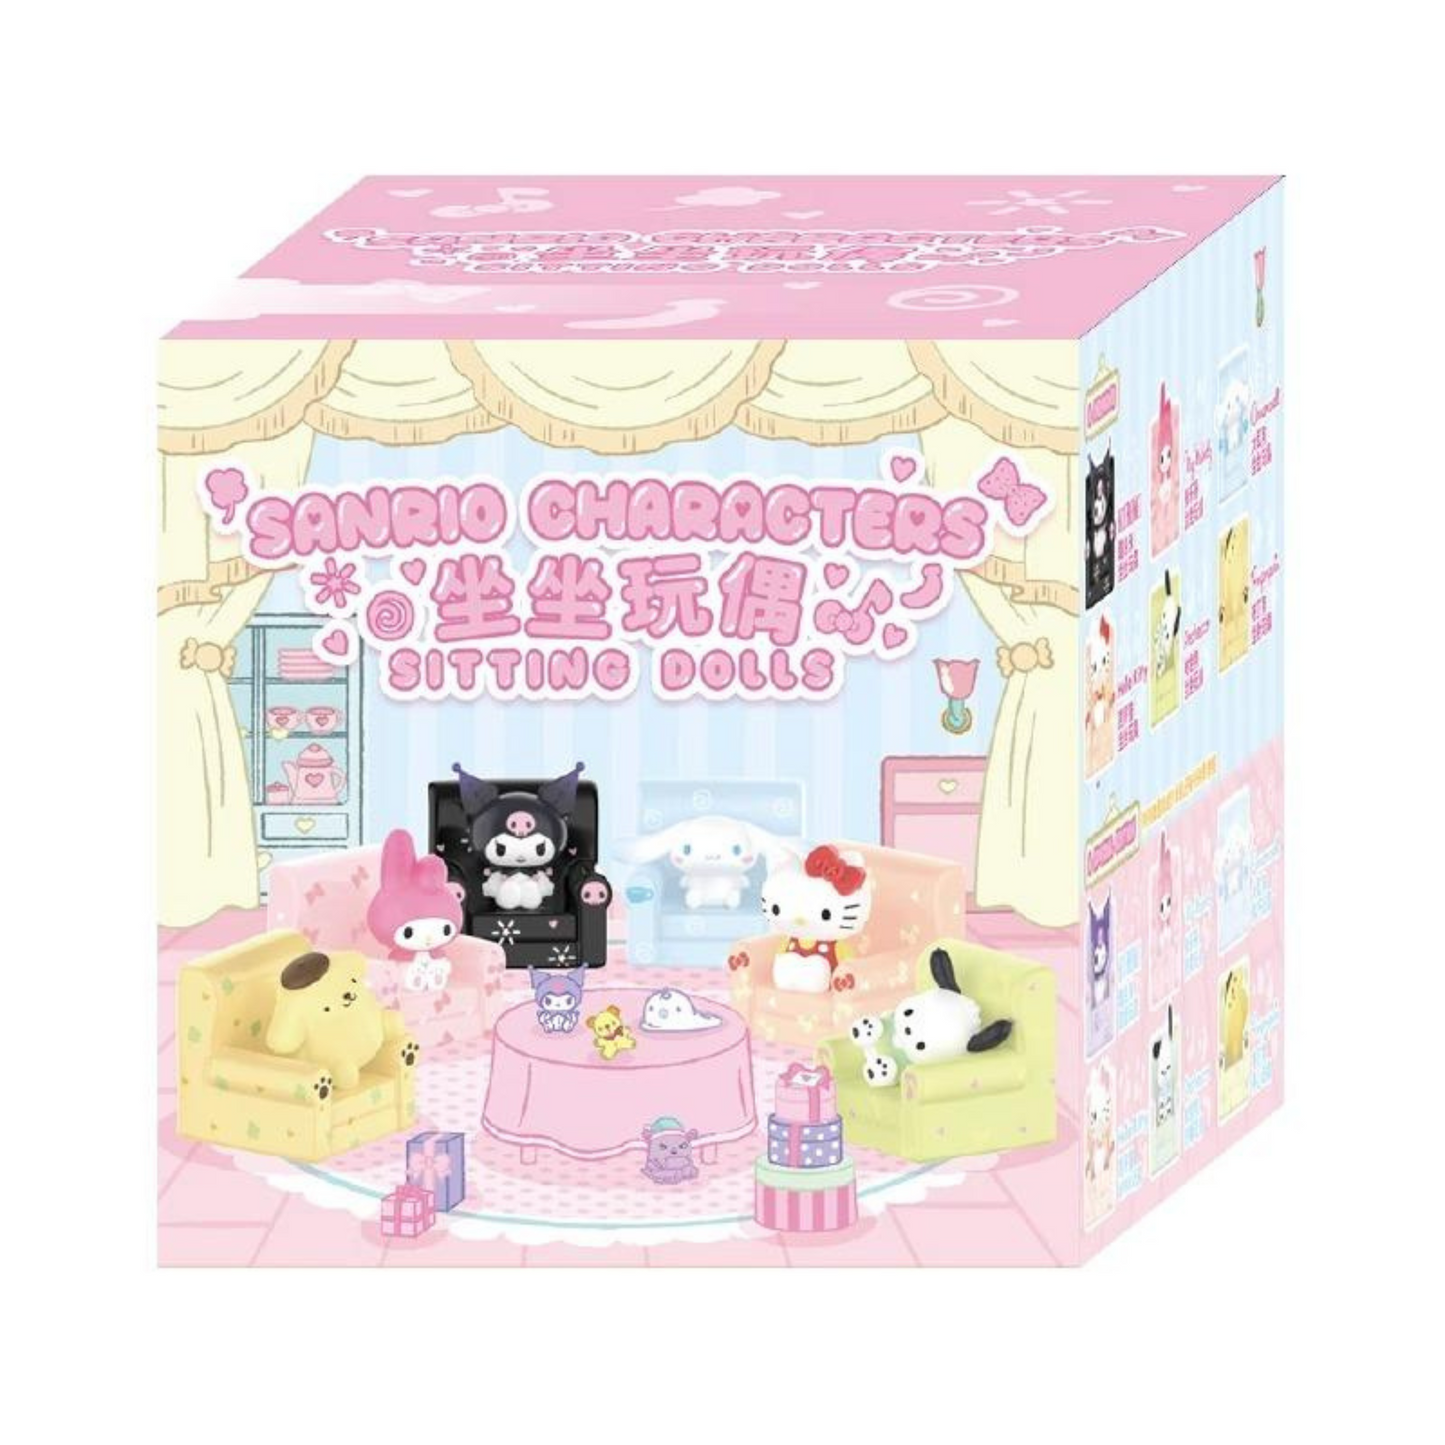 Top Toy Sanrio Characters Sitting Dolls Series Blind Box